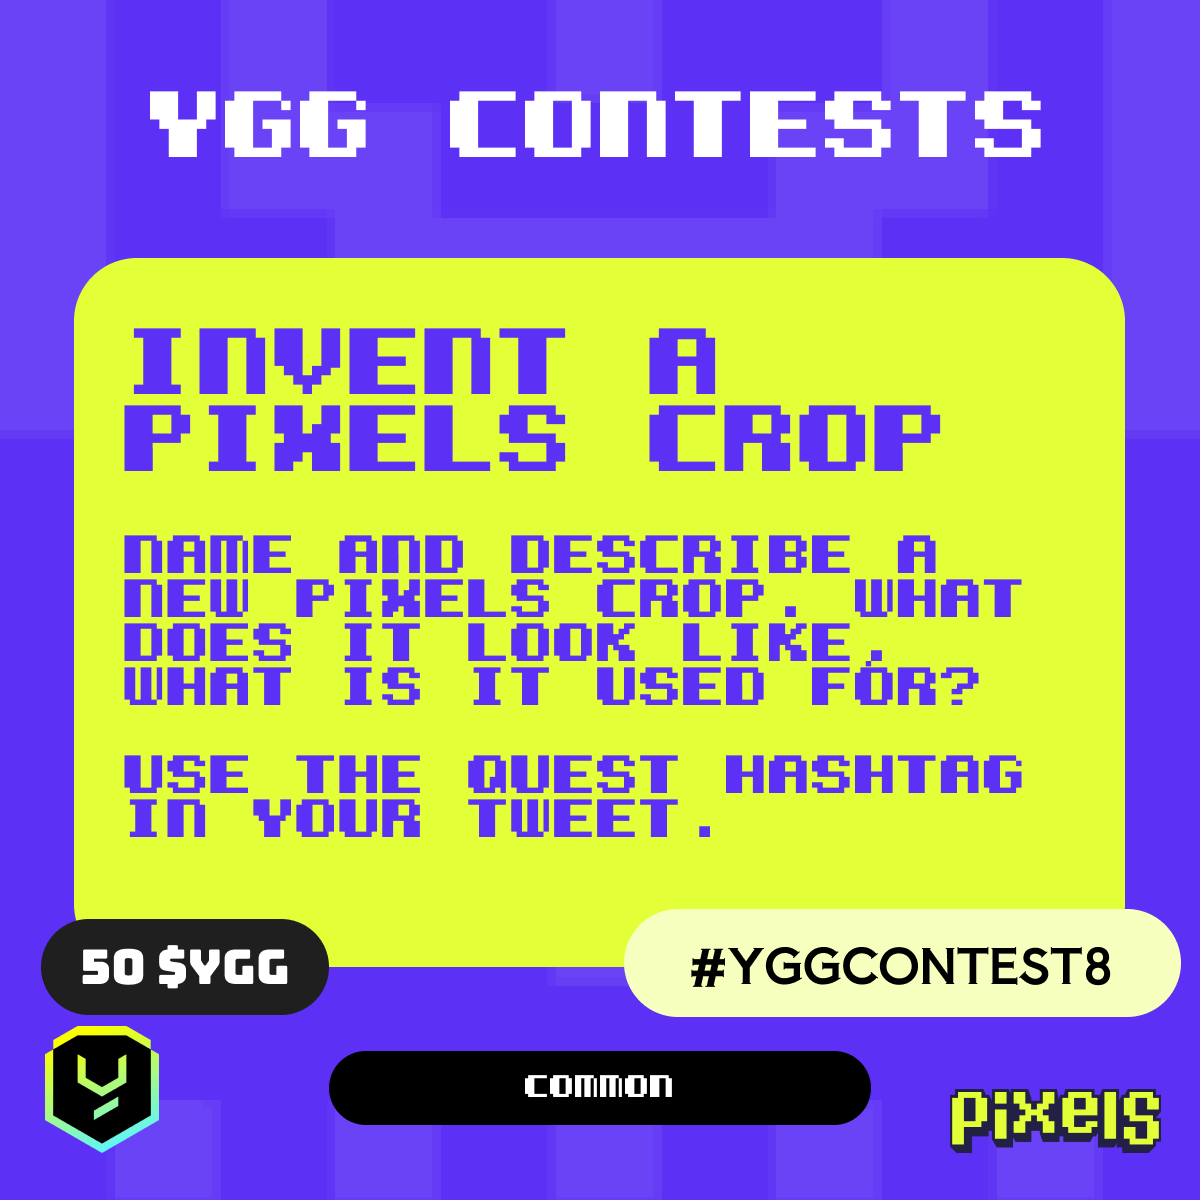 Calling all Superquester creatives! ✍️ For this contest we're looking for your best NEW Pixels crop idea. For example 'Glimmeroot' a crystalline rhizome that grows a $PIXEL gem on the surface, or 'Moonmellows' a watermelon shaped candy crop that allows you to see in the dark.